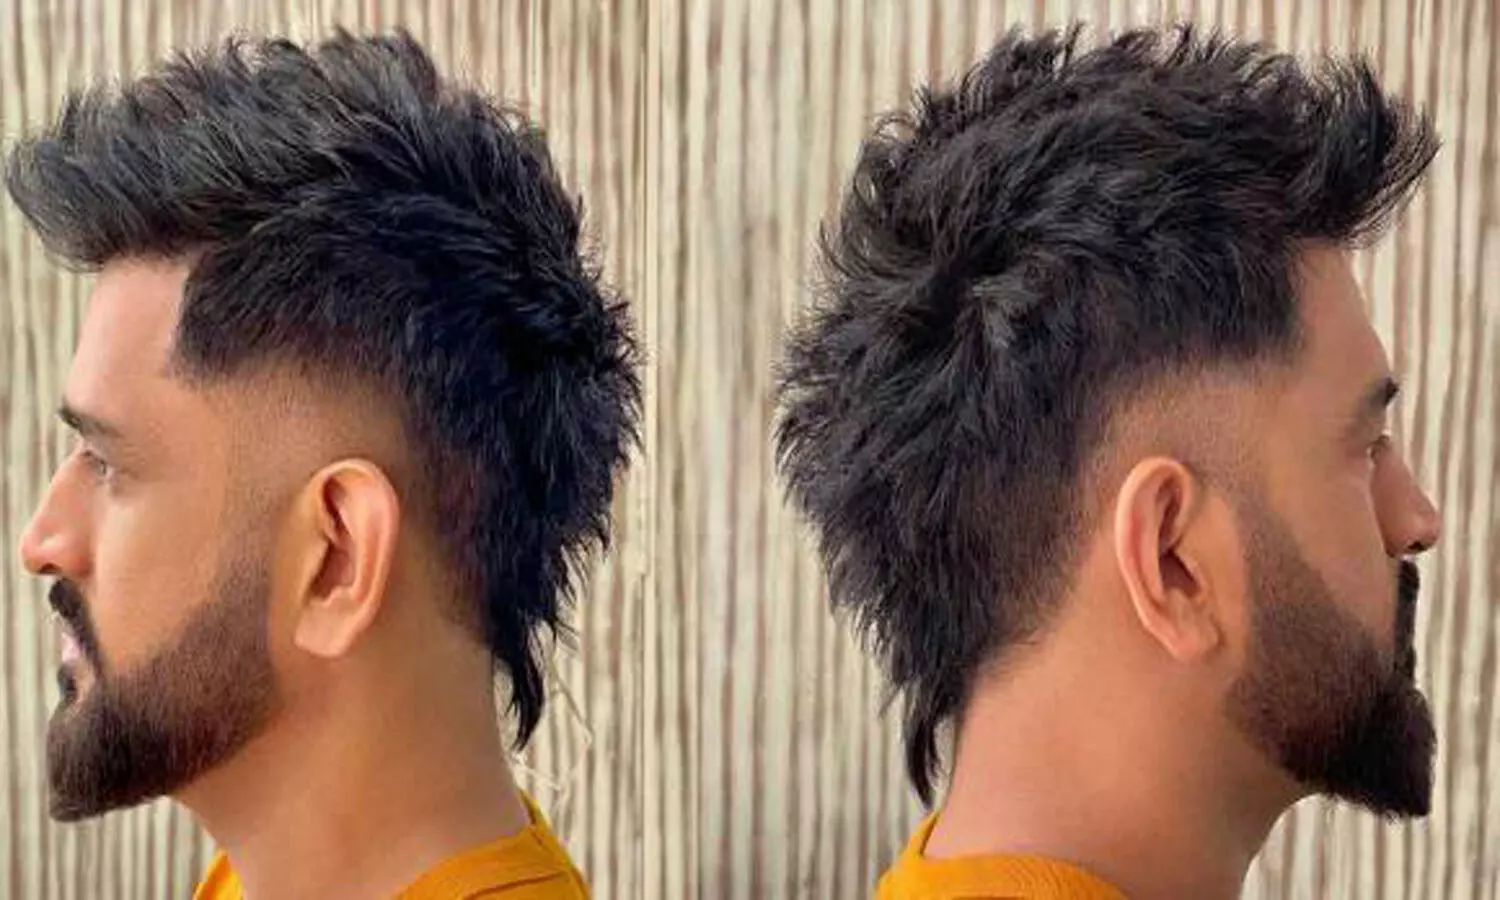 Mahendra Singh Dhoni gets a trendy makeover with a new haircut, wins the internet